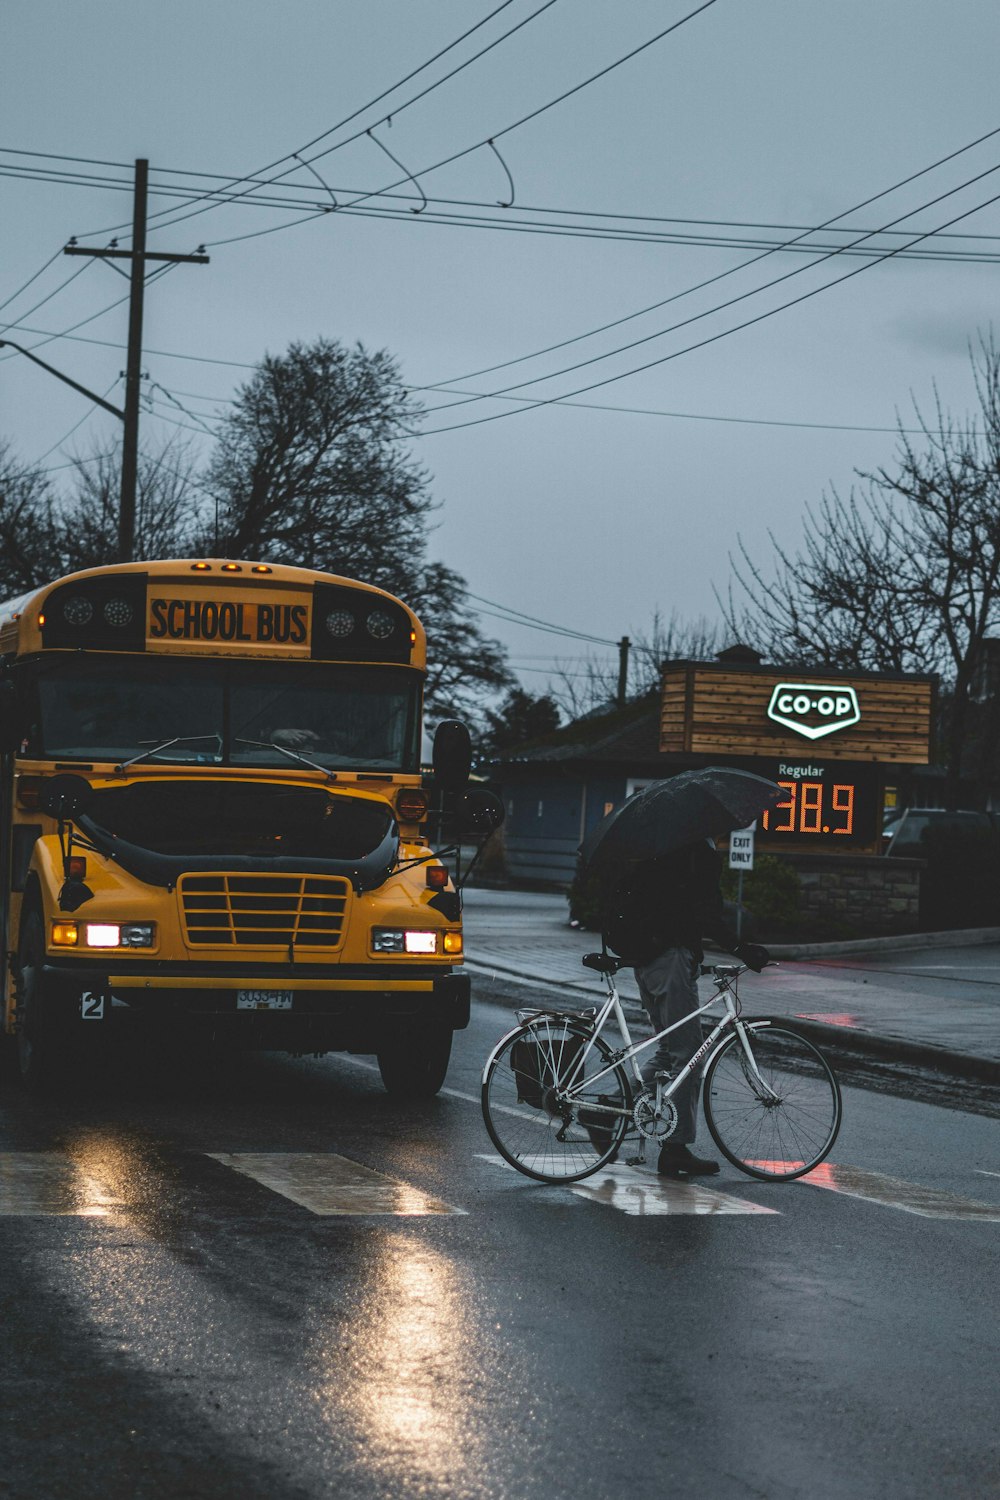 yellow school bus on road during daytime